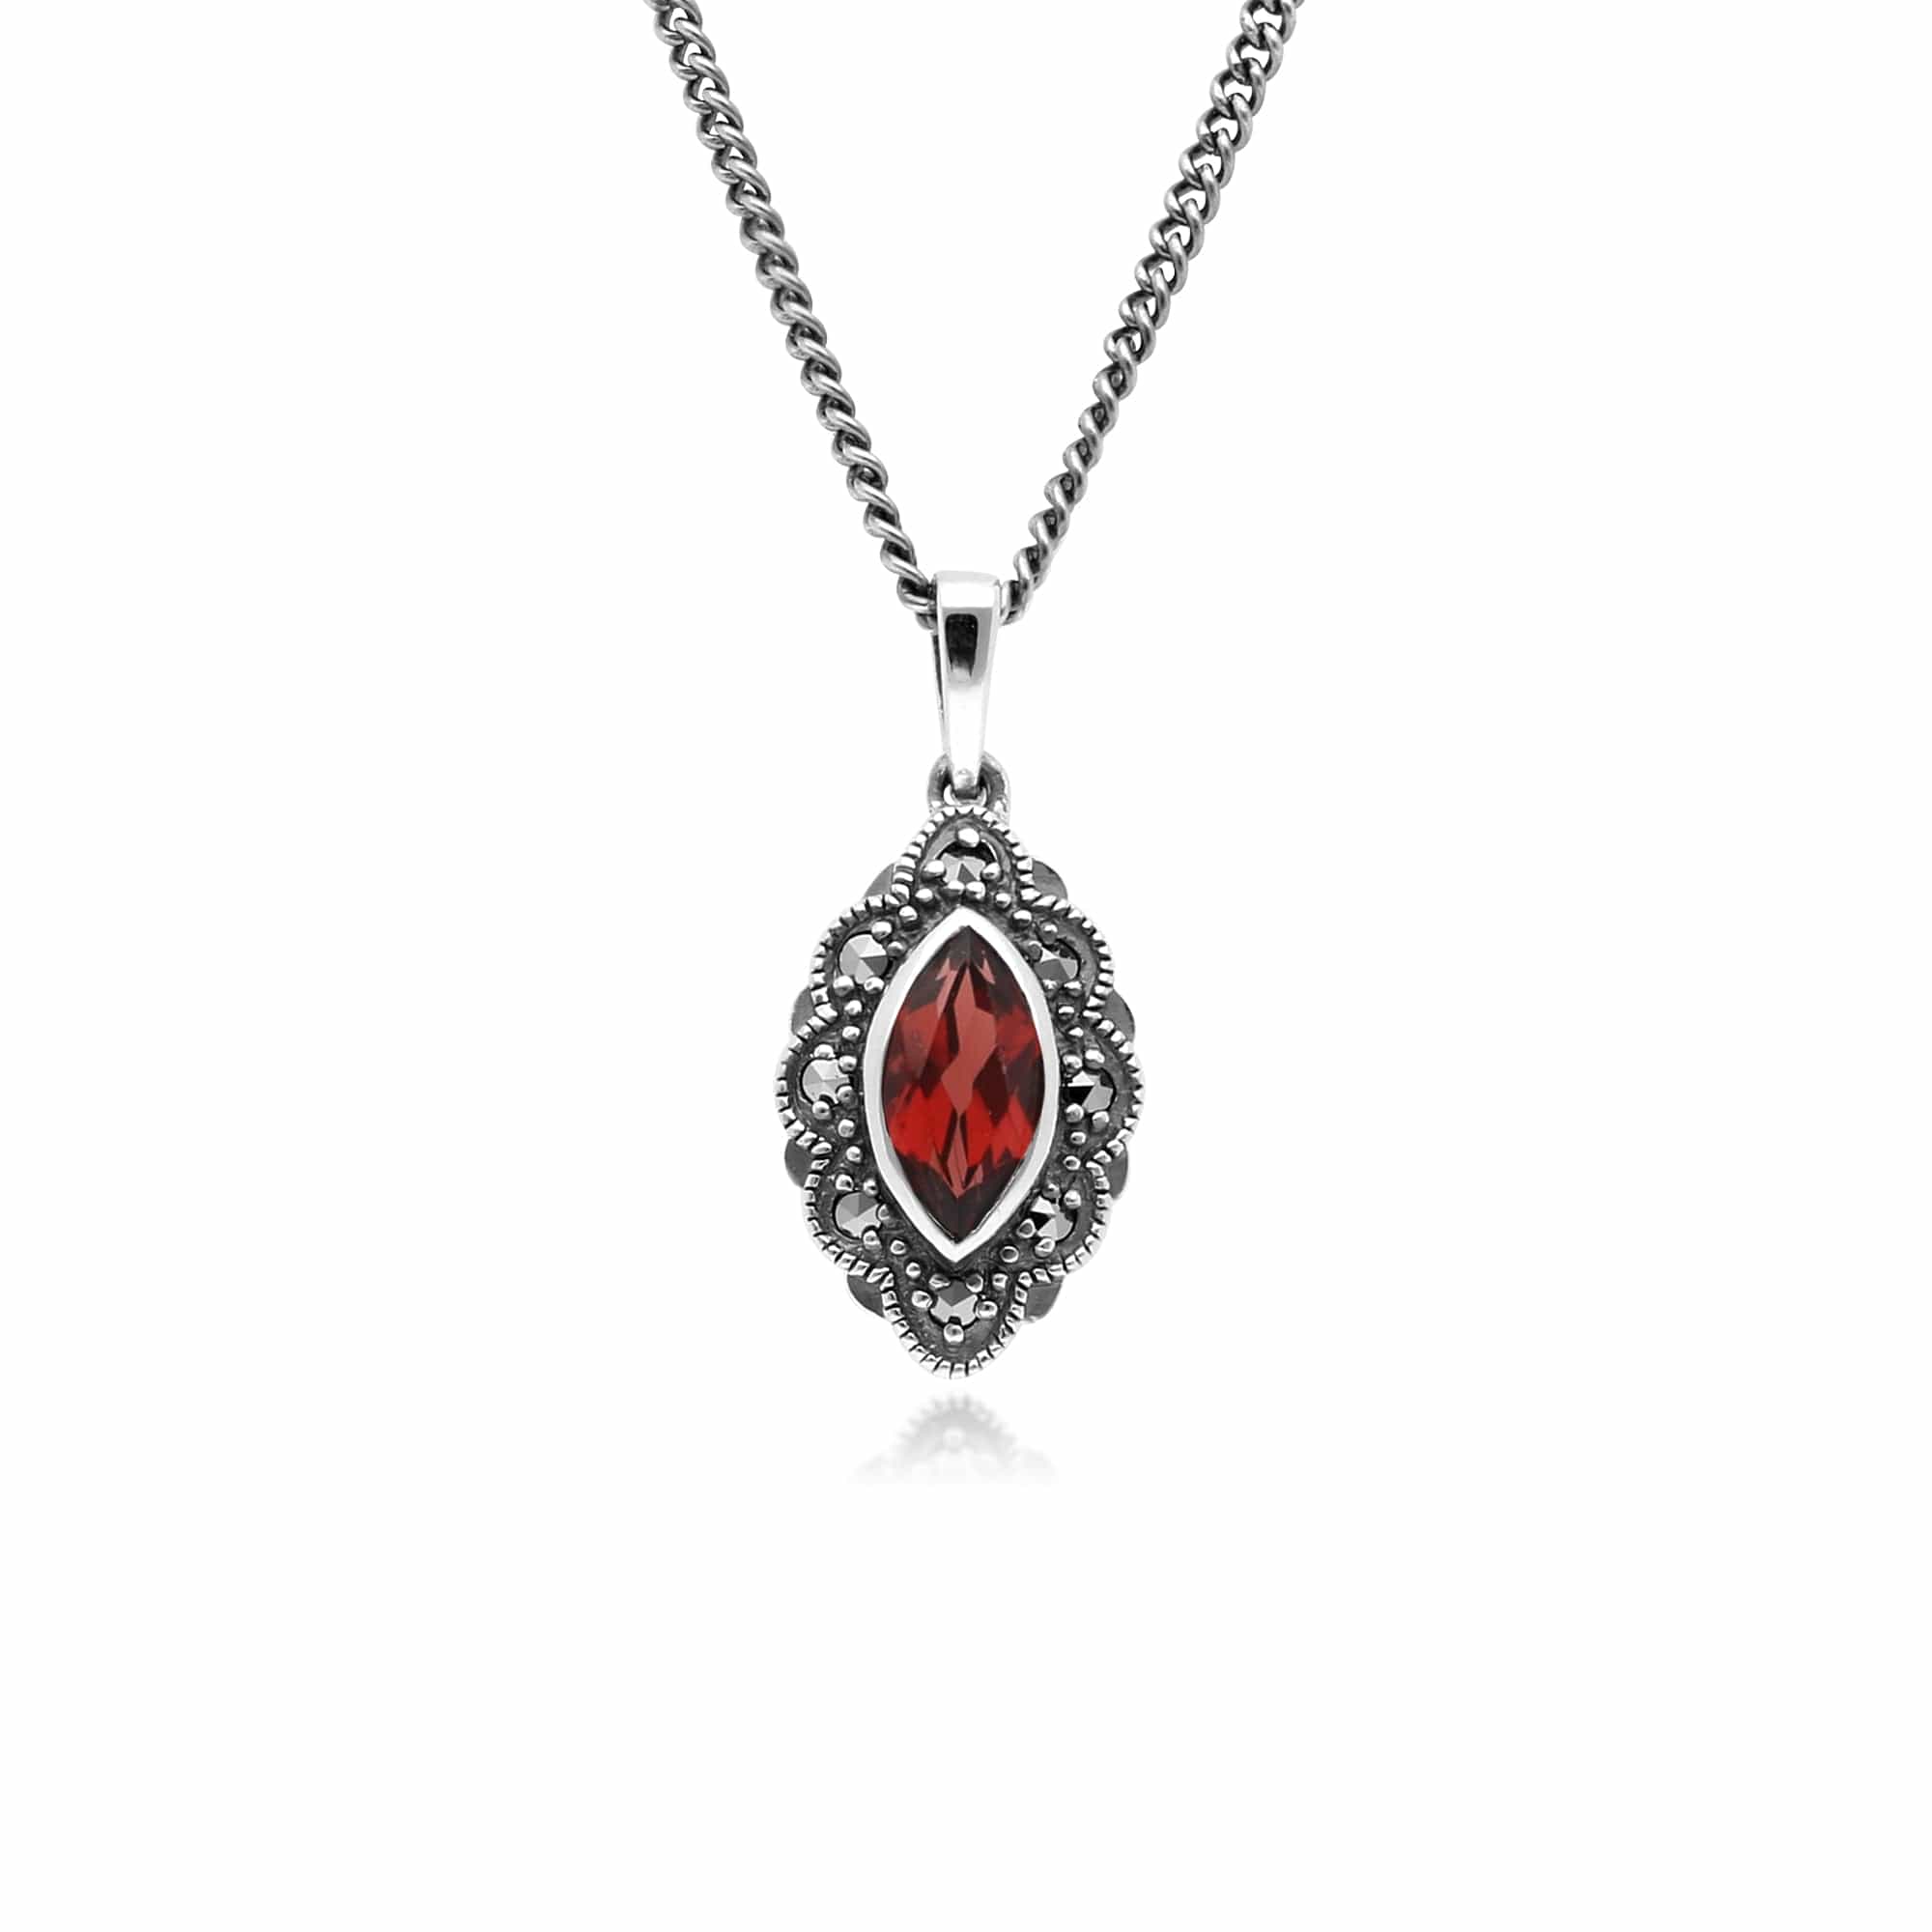 214N696103925 Art Deco Style Marquise Garnet & Marcasite Pendant in 925 Sterling Silver 1